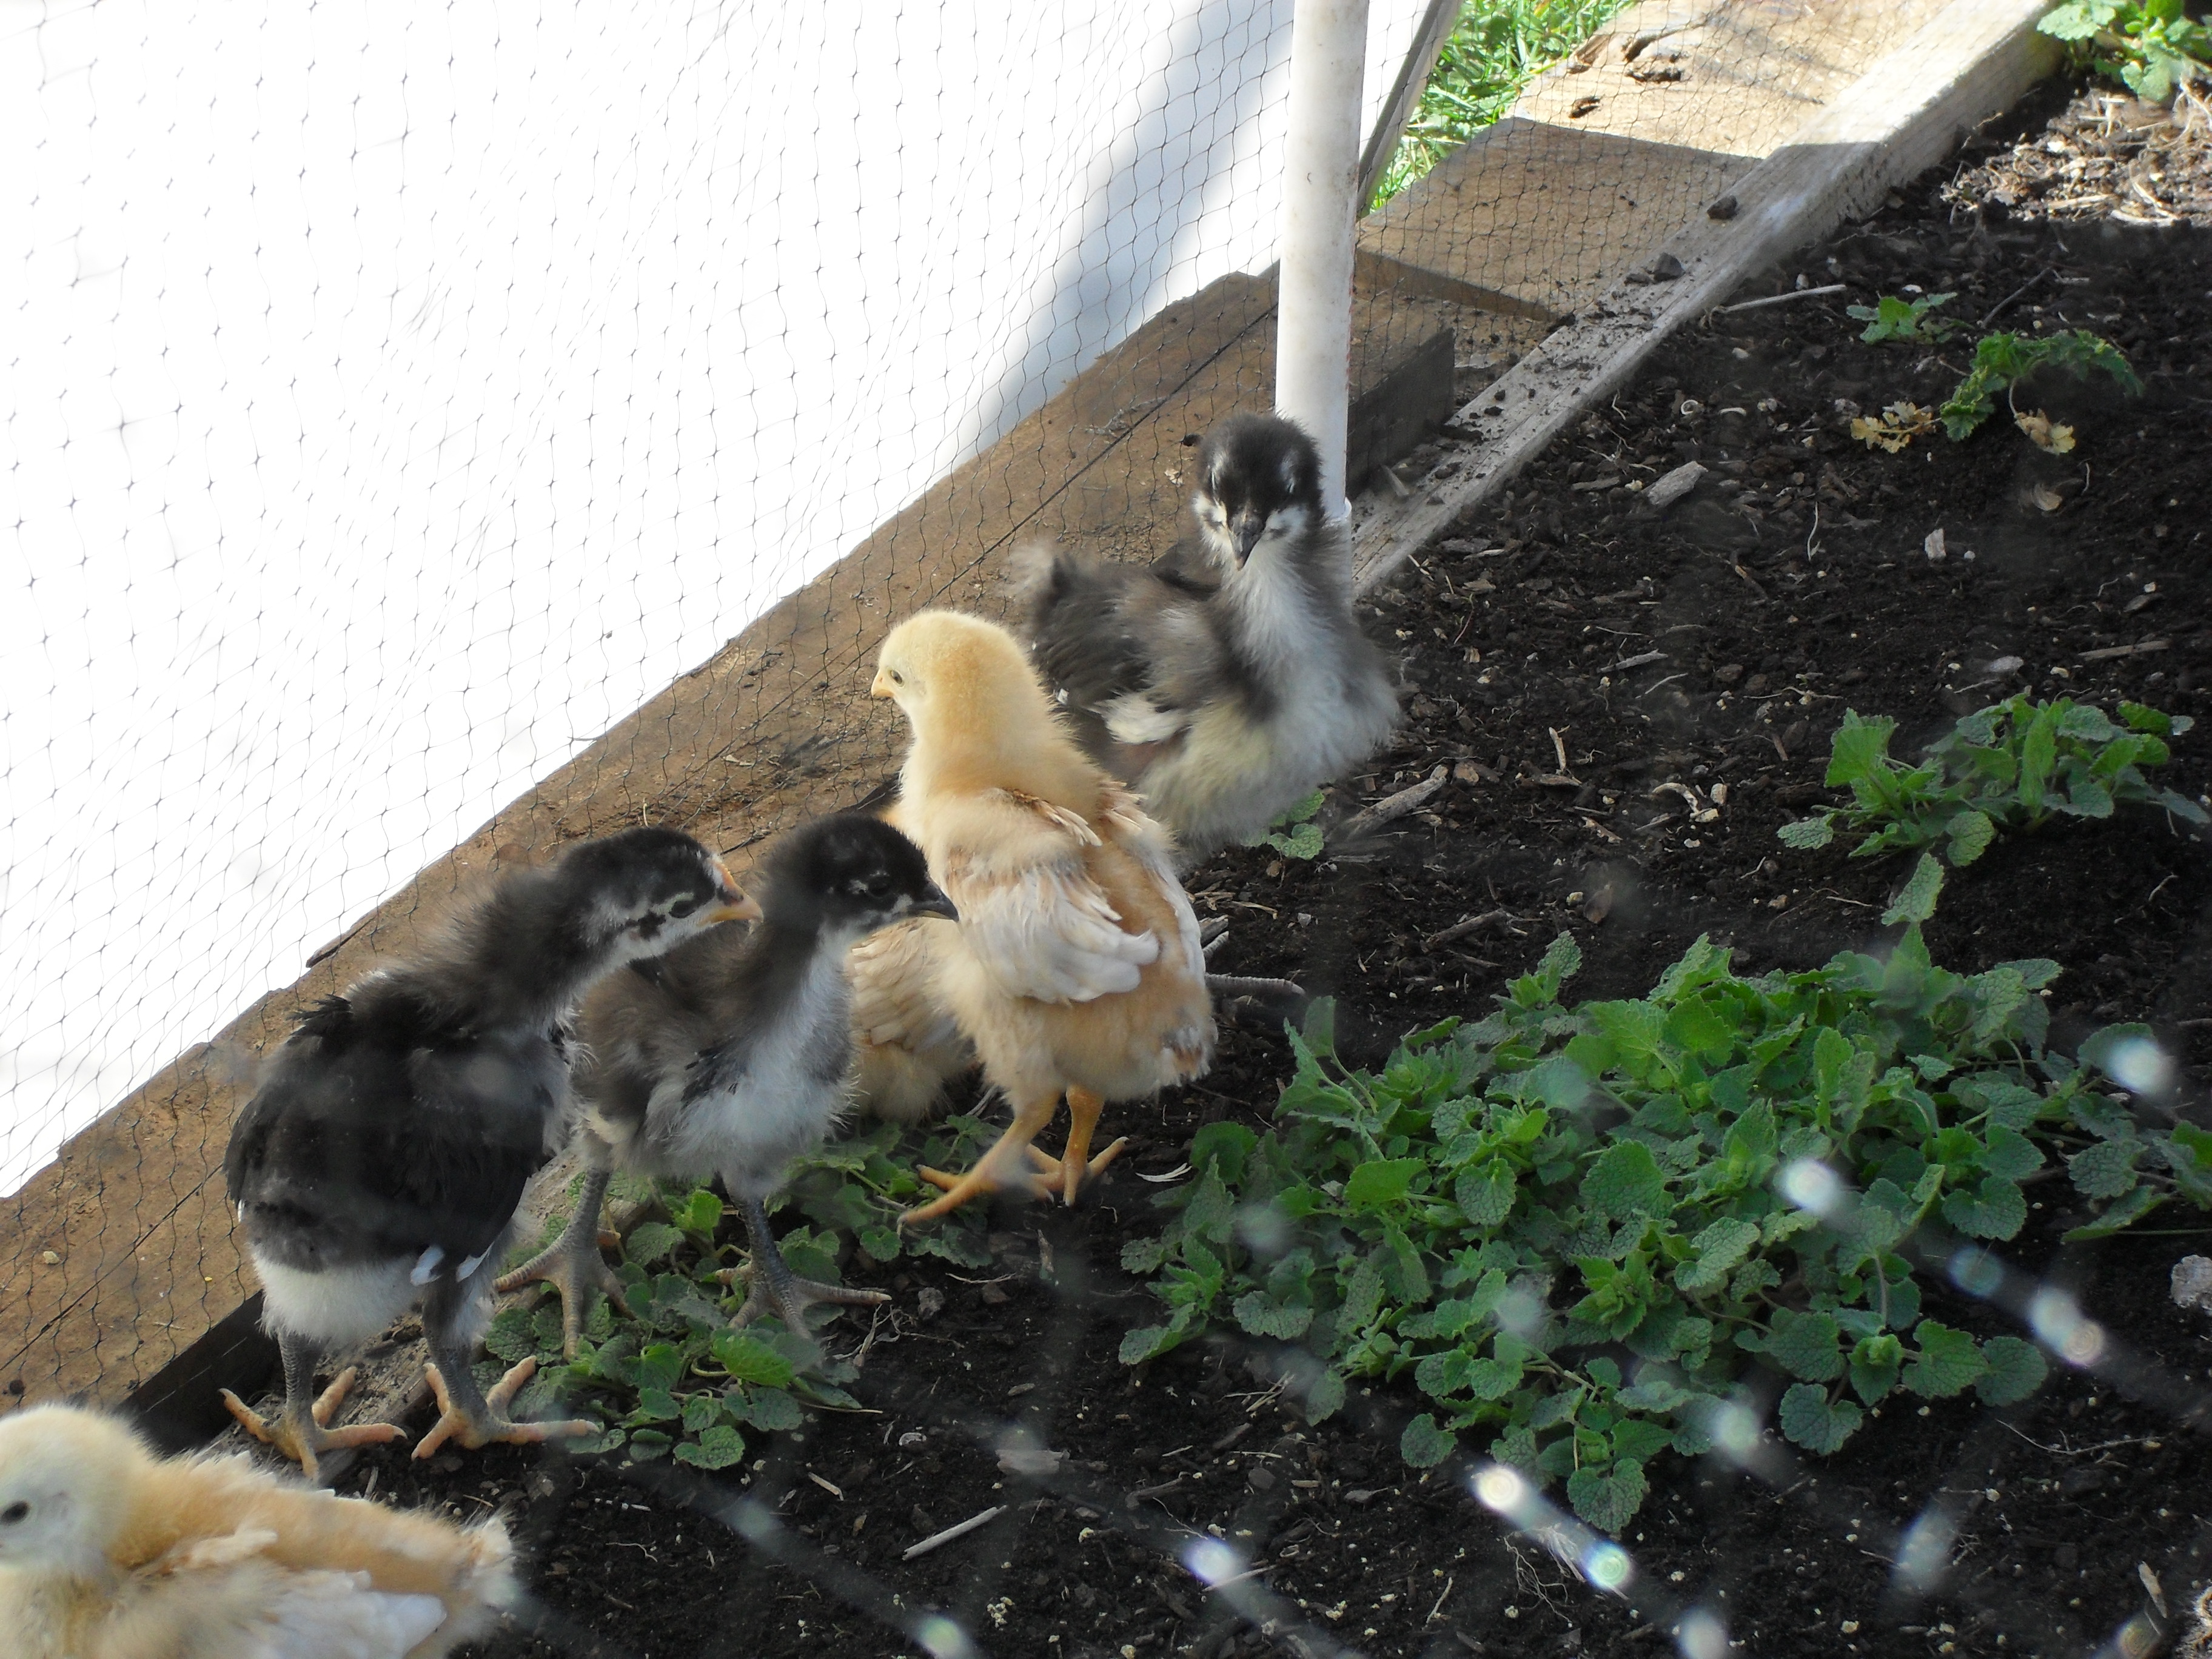 my original flock outside in the spring on a very warm day (March 13, 2012)